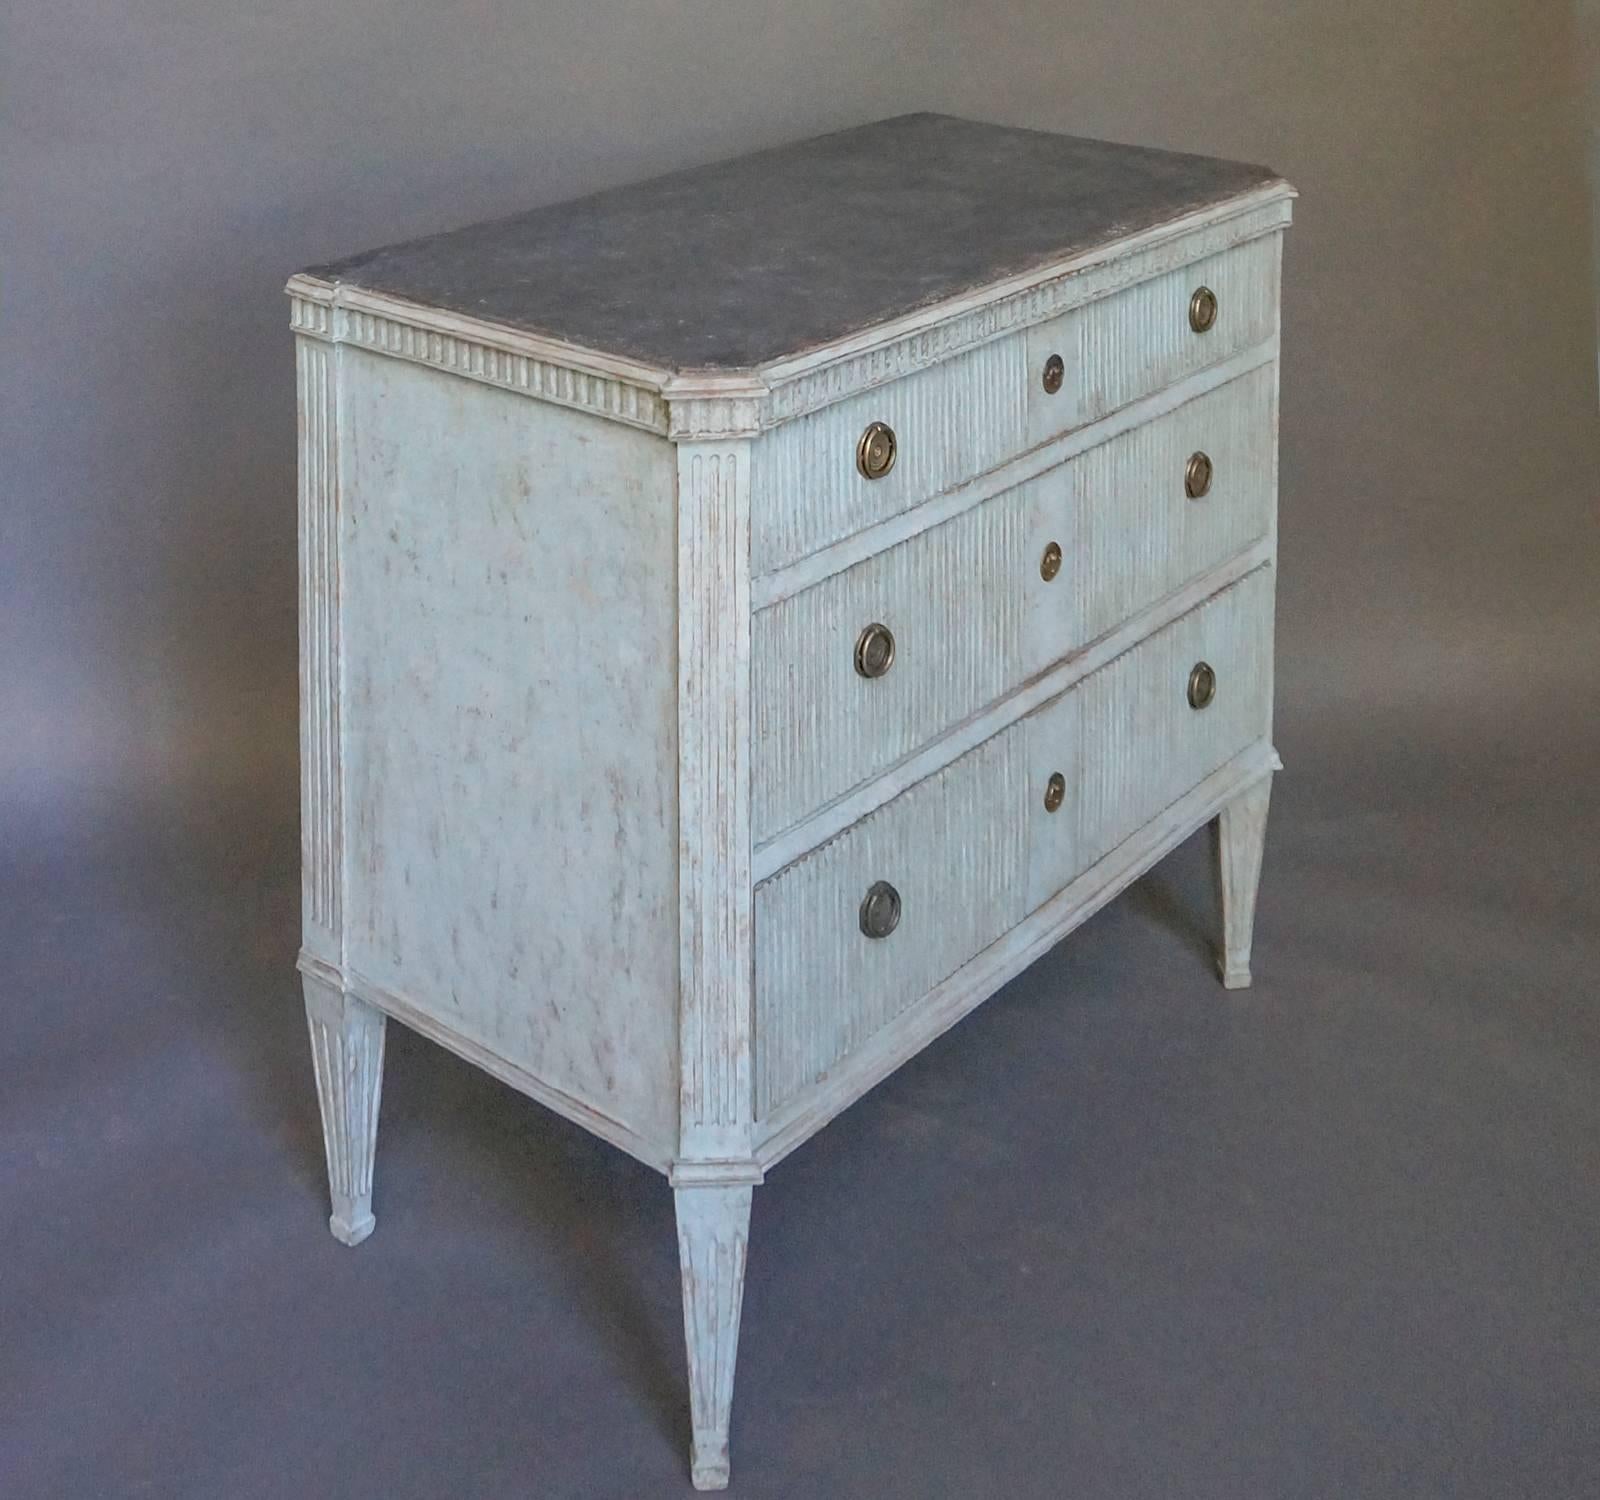 Swedish three-drawer chest, circa 1850, in pale blue paint. Vertical reeding on the drawer fronts and dentil molding under the black-painted top. Canted corners with vertical reeding on the corner posts and tapering, square legs. Original brass